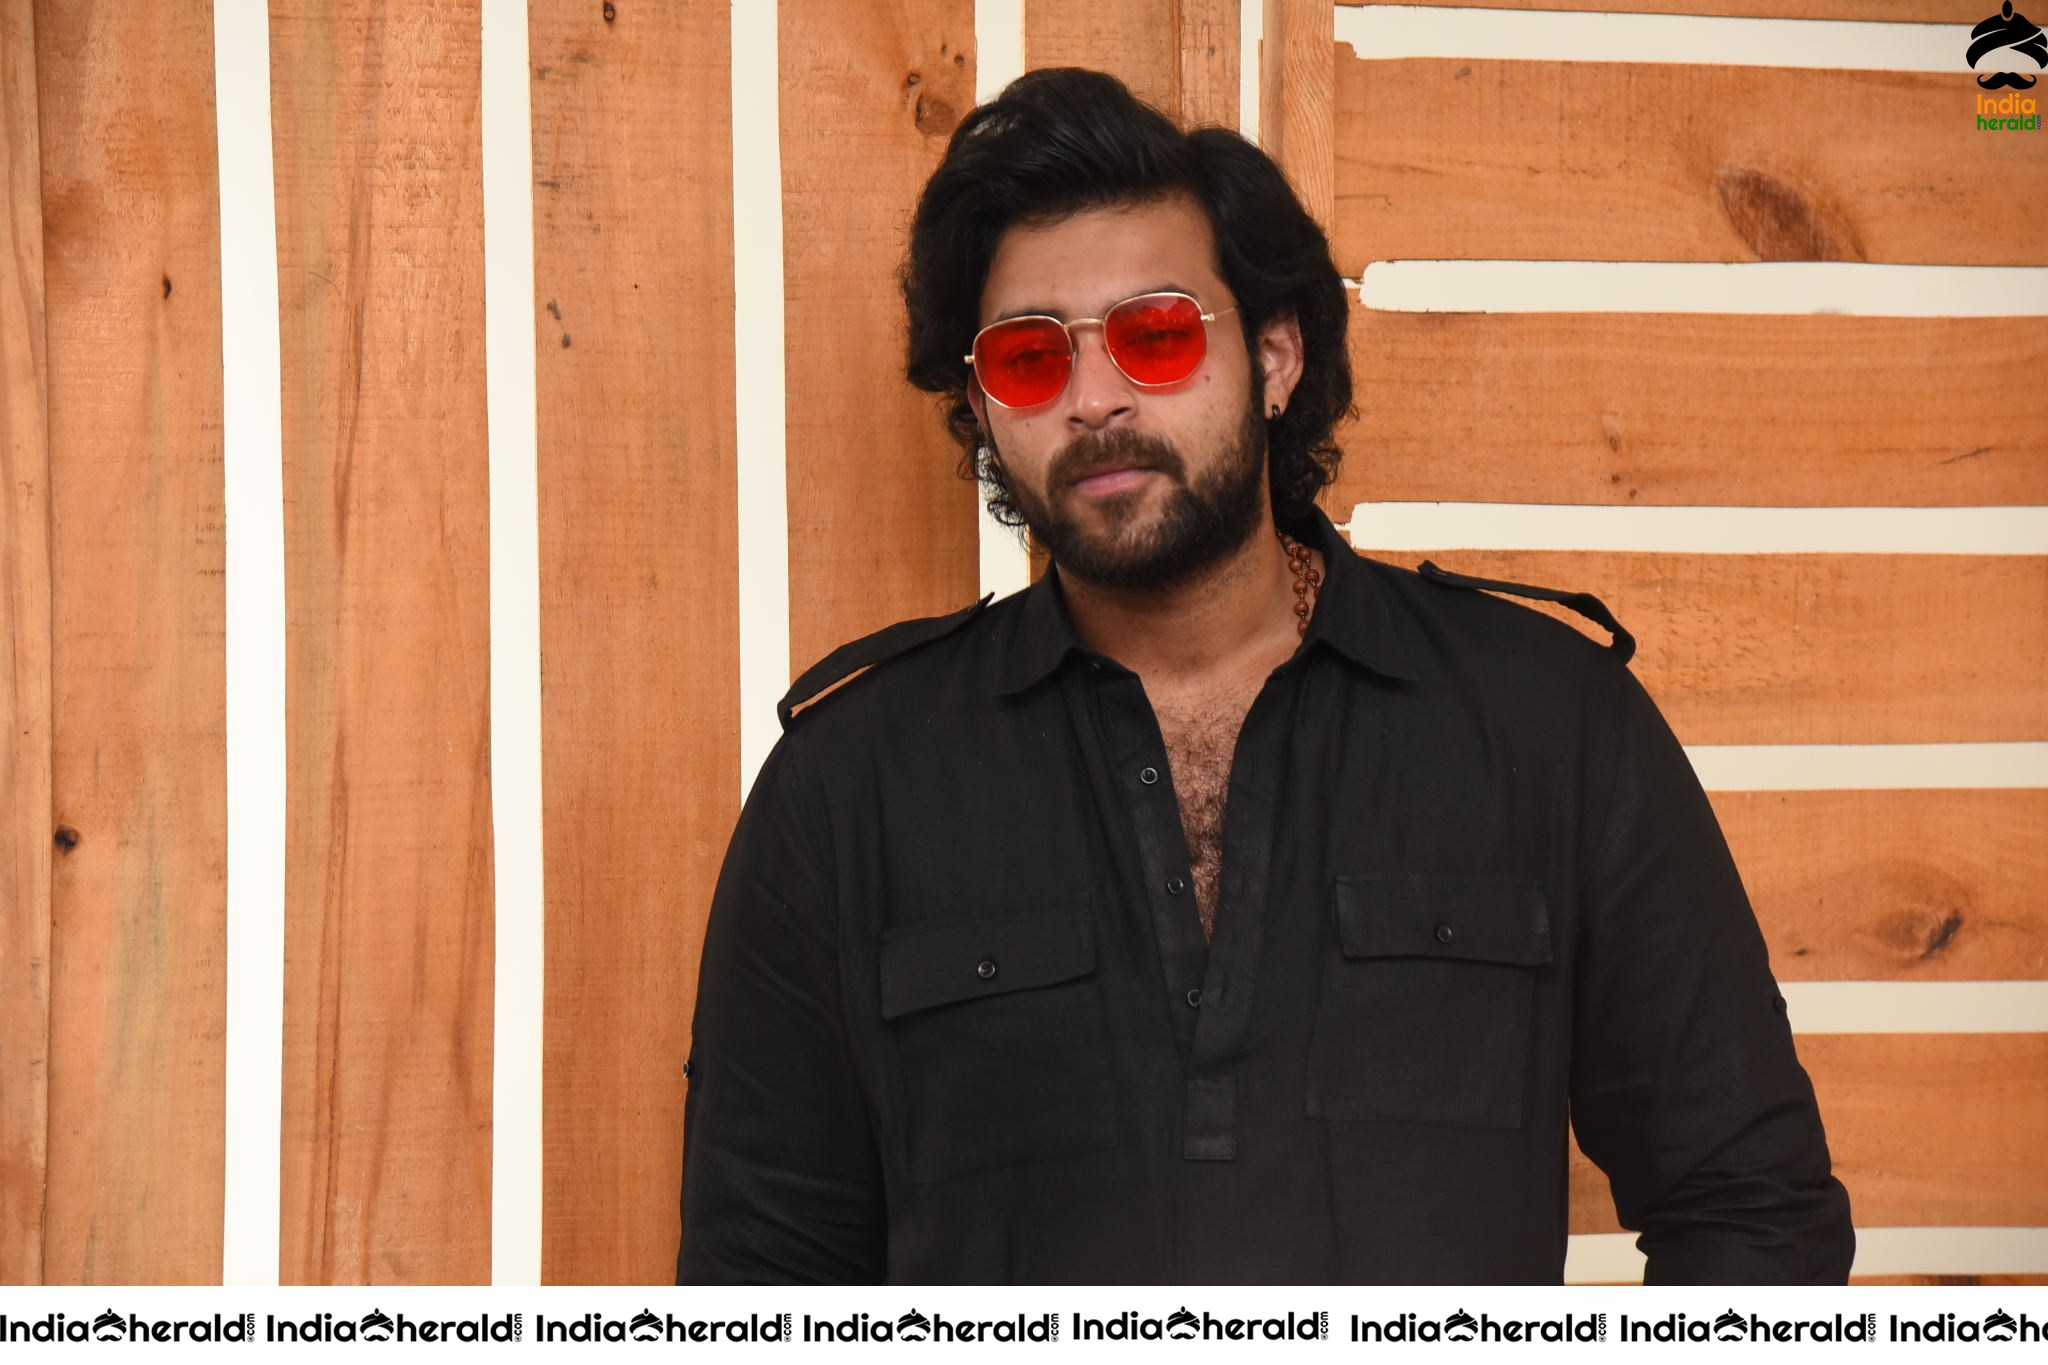 Actor Varun Tej Looking Dashing in Black and Red Coolers Set 2